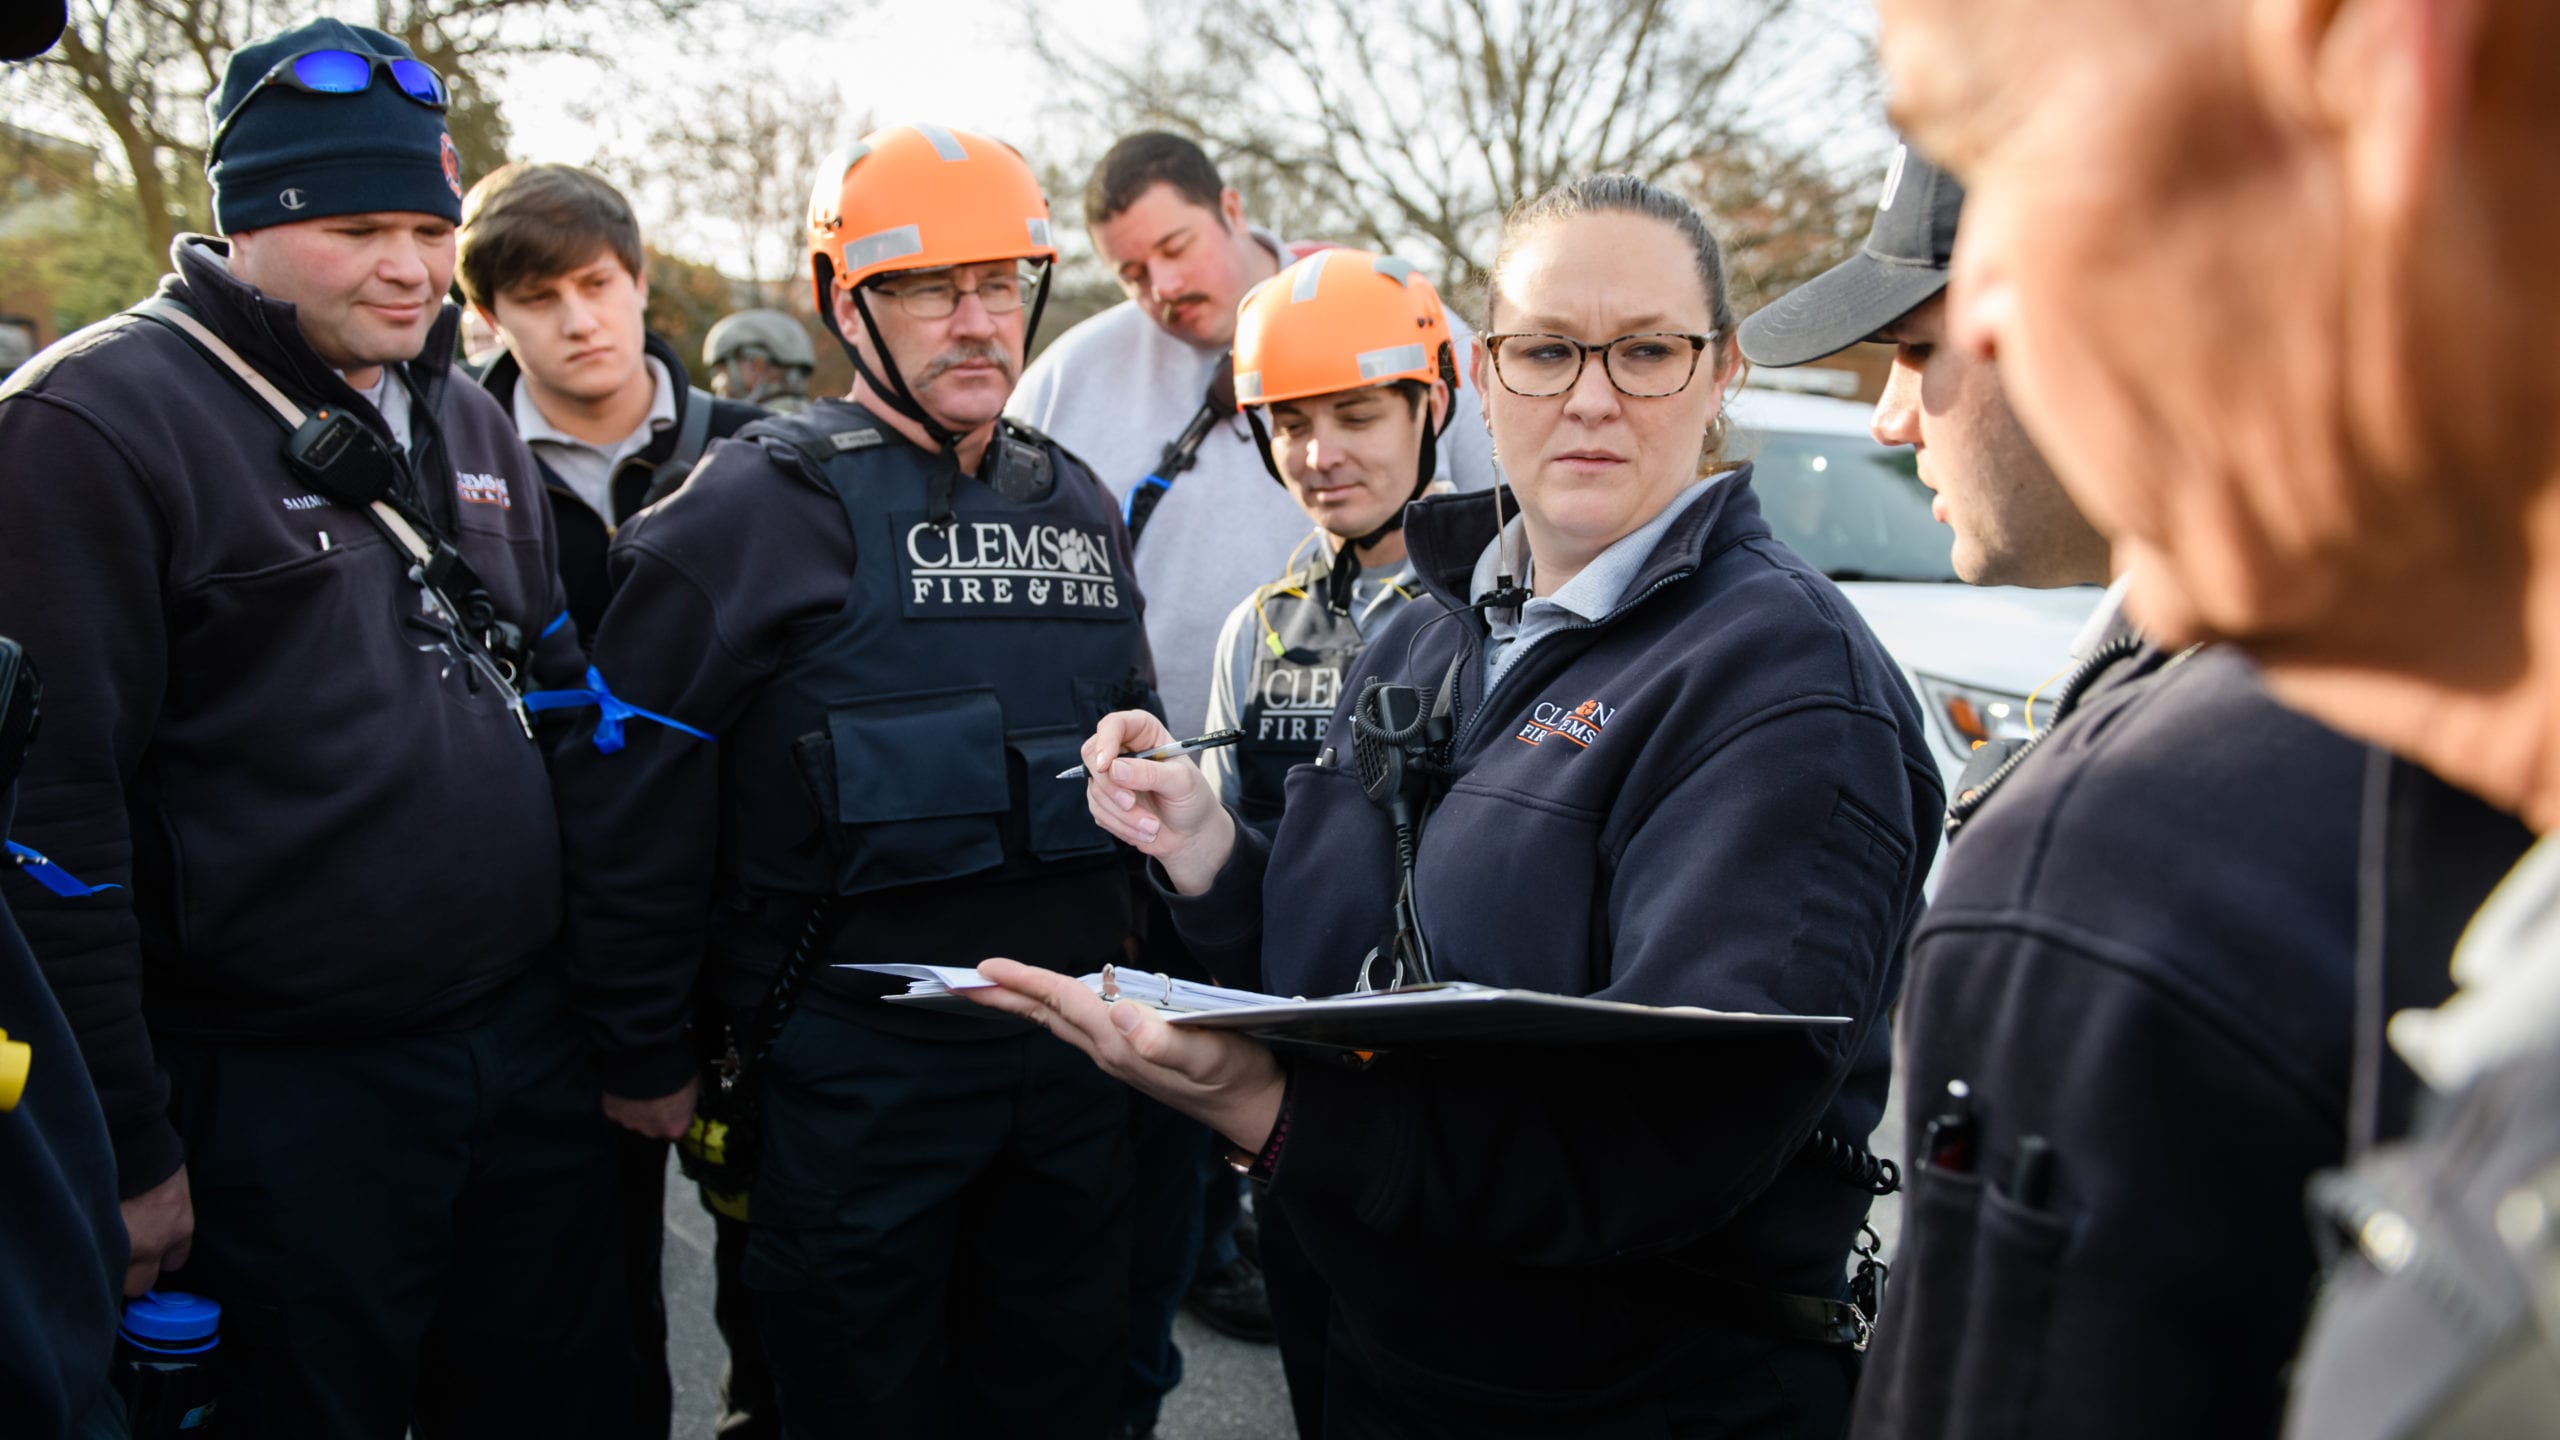 Jessica Landreth, a captain with Clemson University Fire & EMS, gives instructions to colleagues during a 2019 exercise